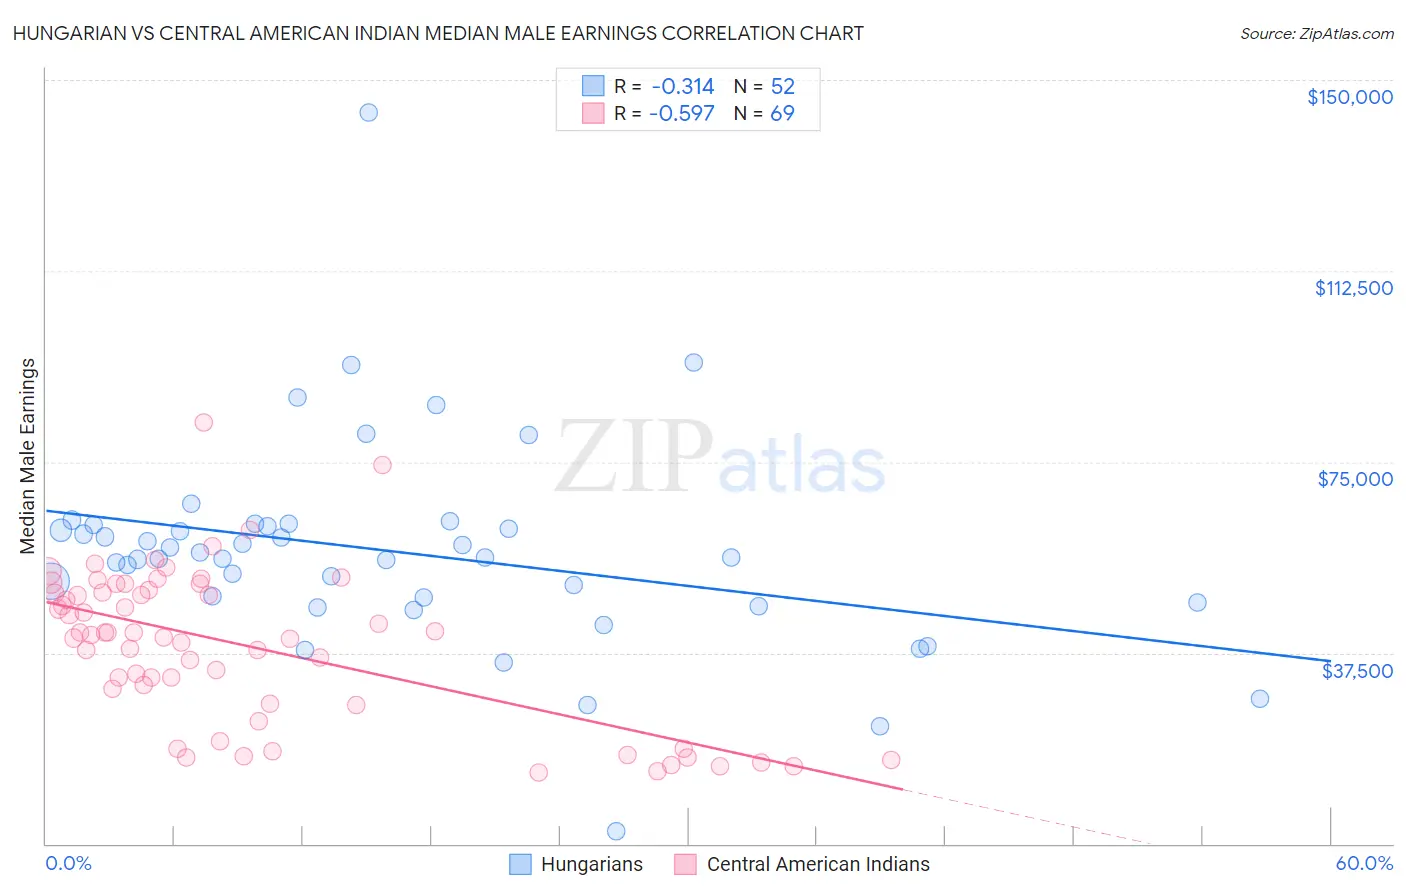 Hungarian vs Central American Indian Median Male Earnings